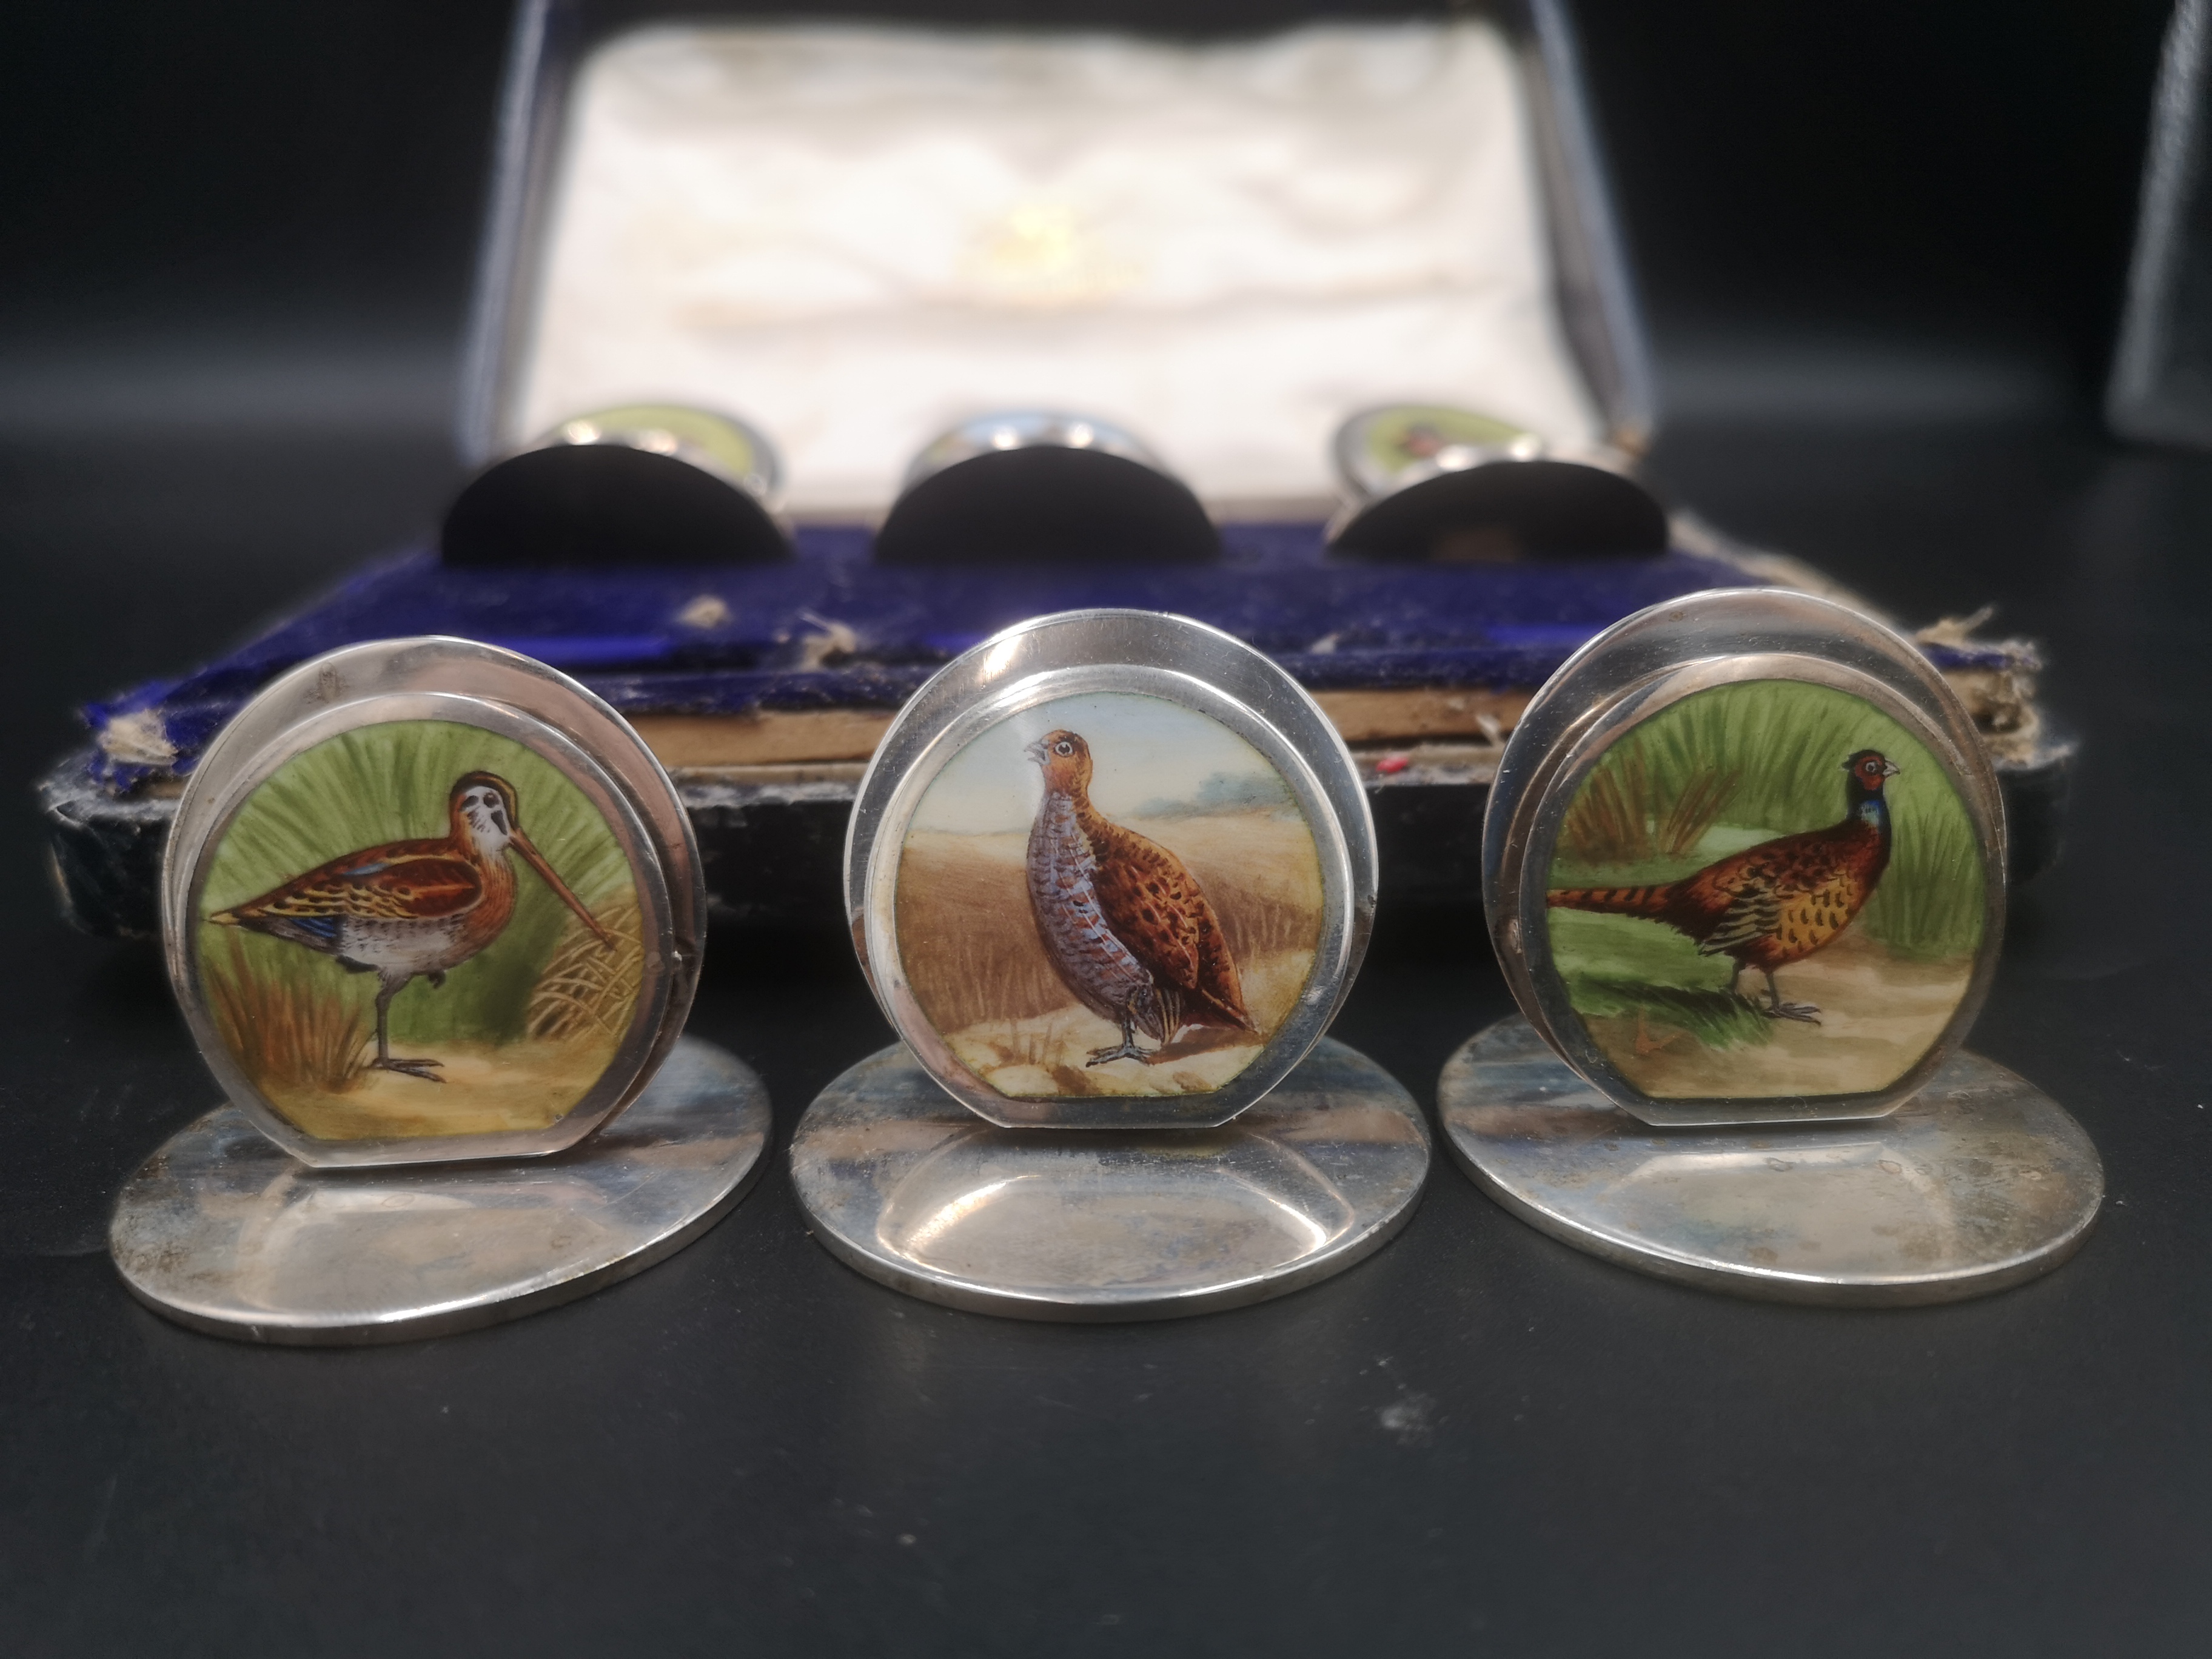 Boxed set of Edwardian silver menu card holders with hand painted birds by Sampson Mordan - Image 5 of 5